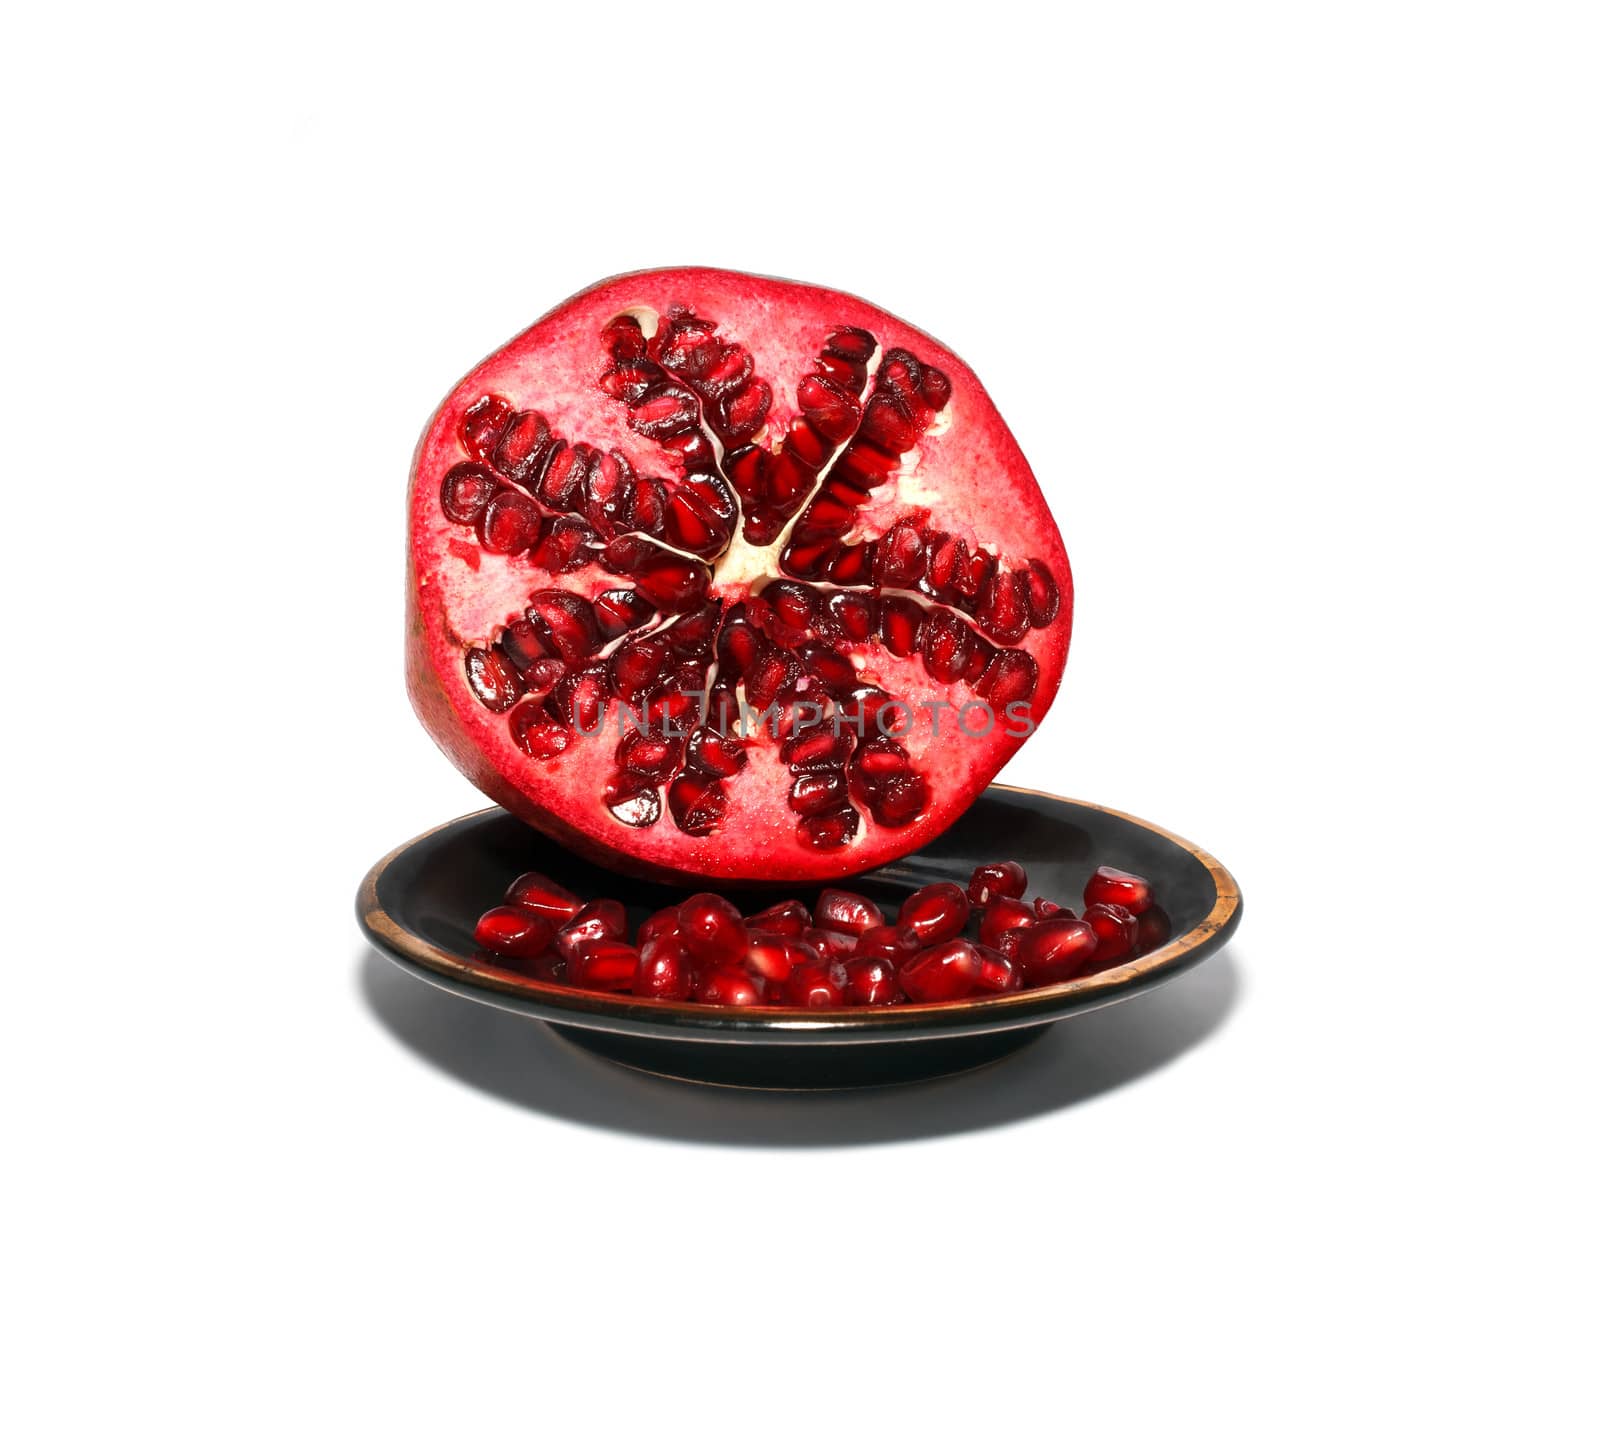 Seeds and sliced pomegranate on a black saucer on a white background